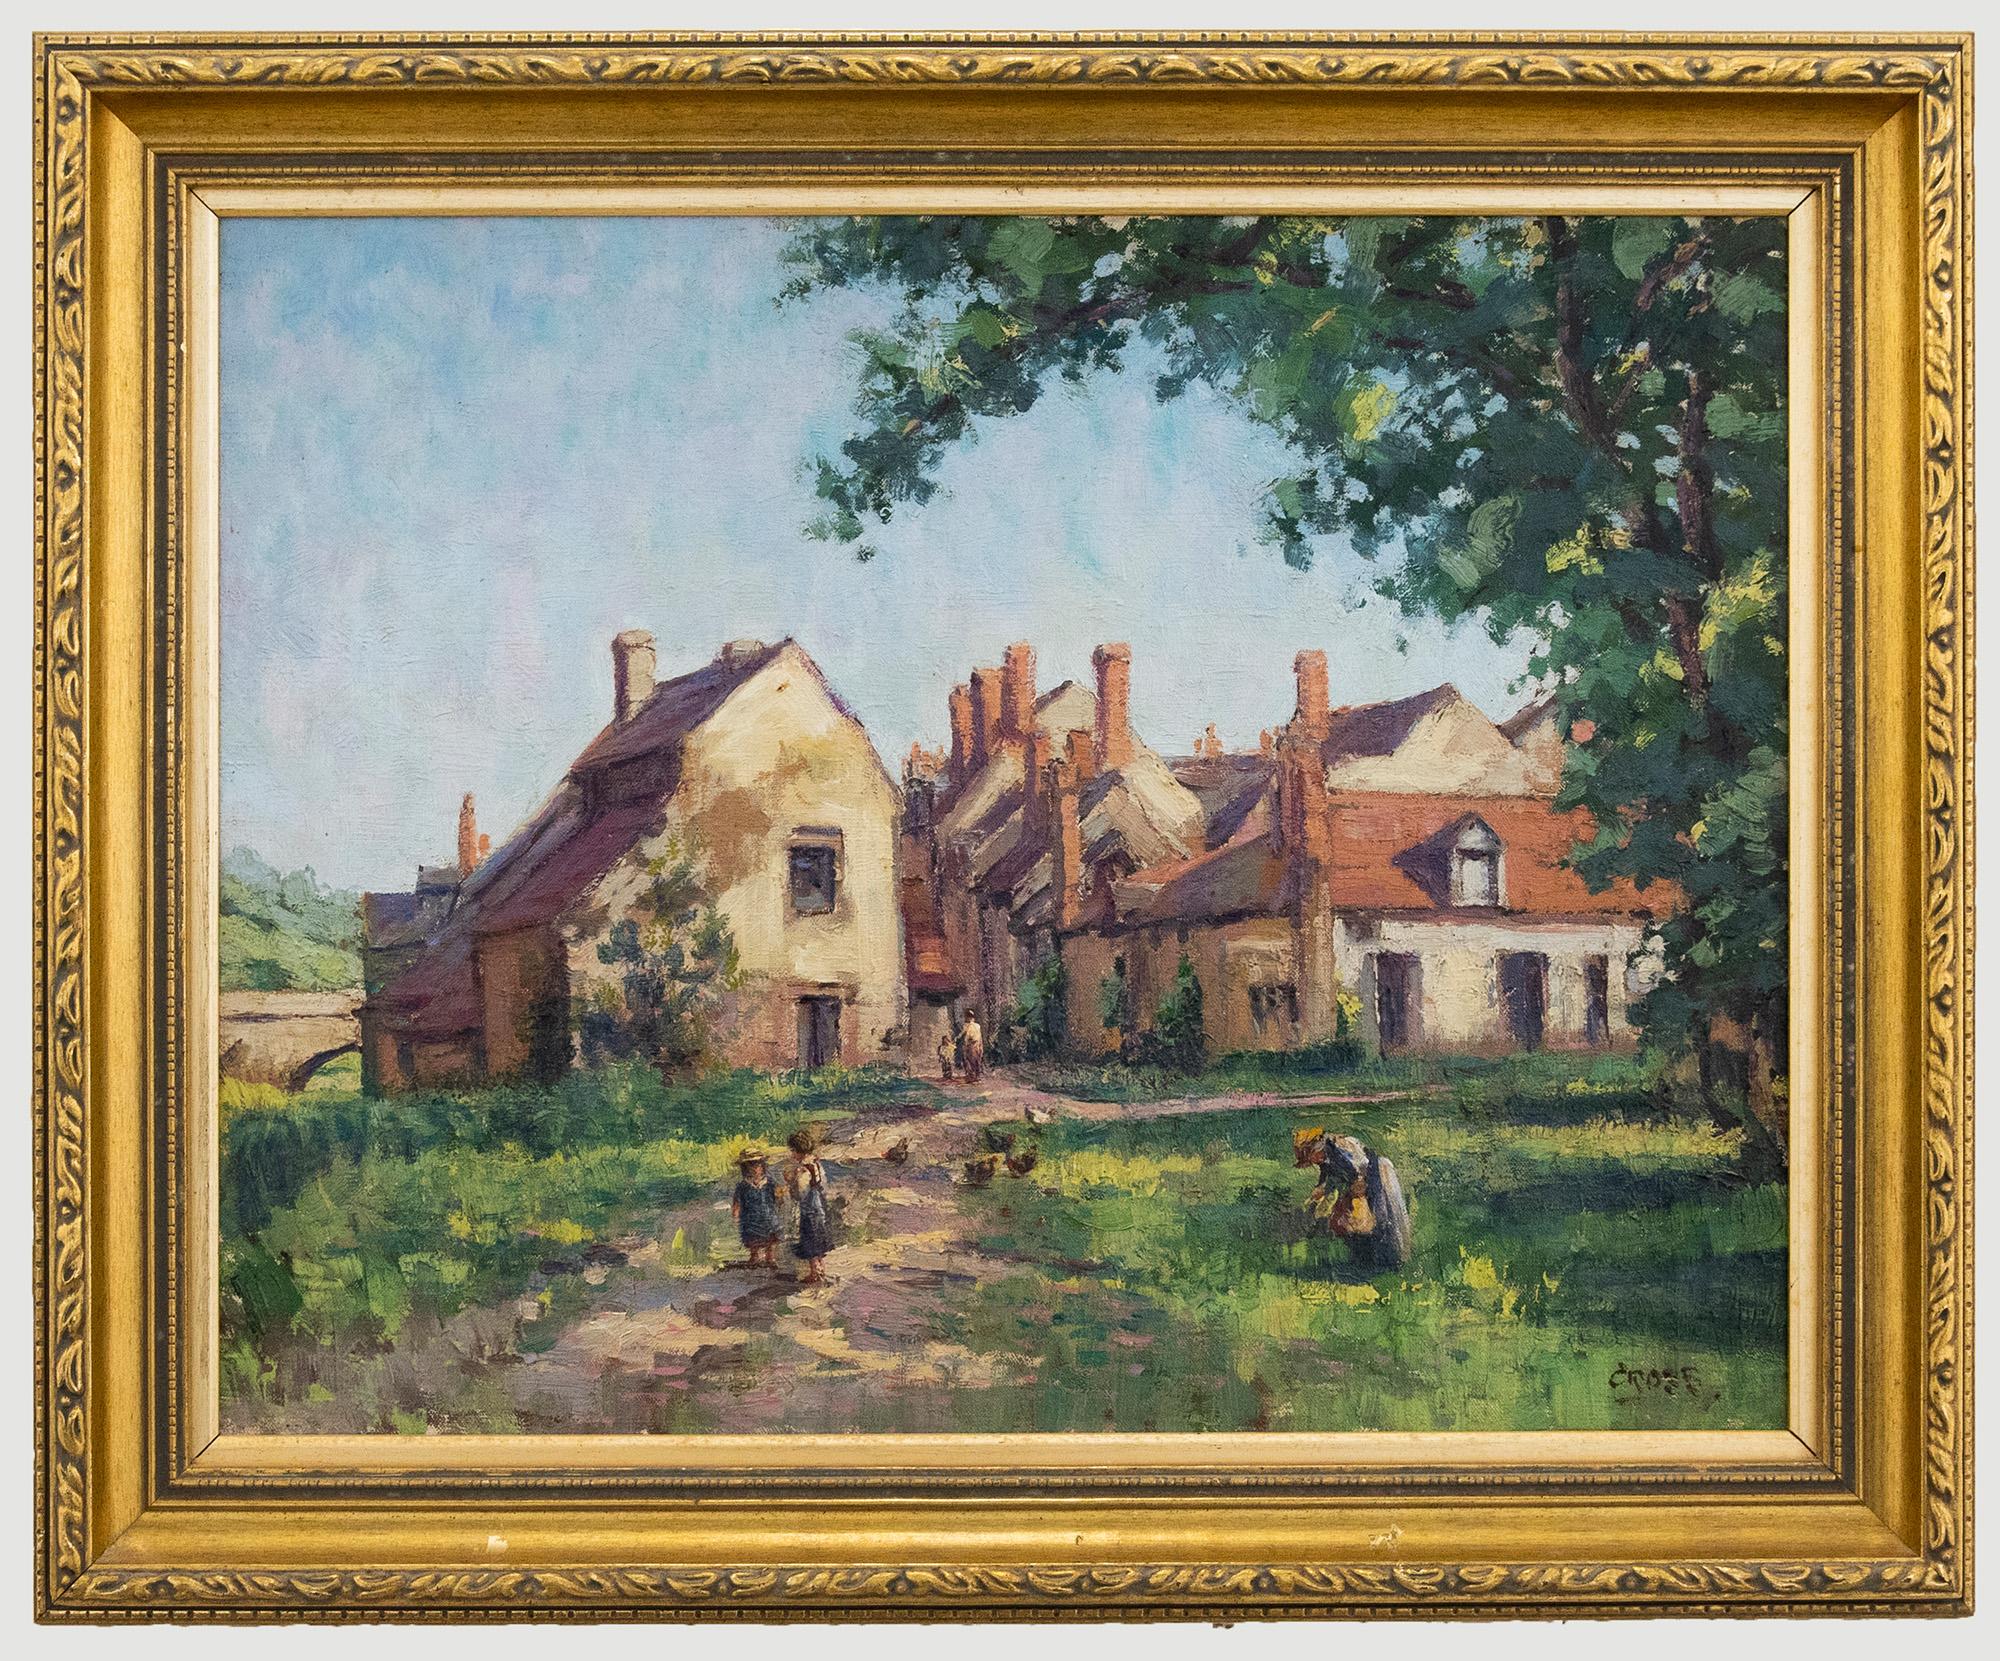 A delightful oil painting of a large riverside town with figures foraging and children playing on a bright summer's day. The oil has been illegibly signed to the lower right corner. Well-presented in a 20th century gilt frame. On canvas on